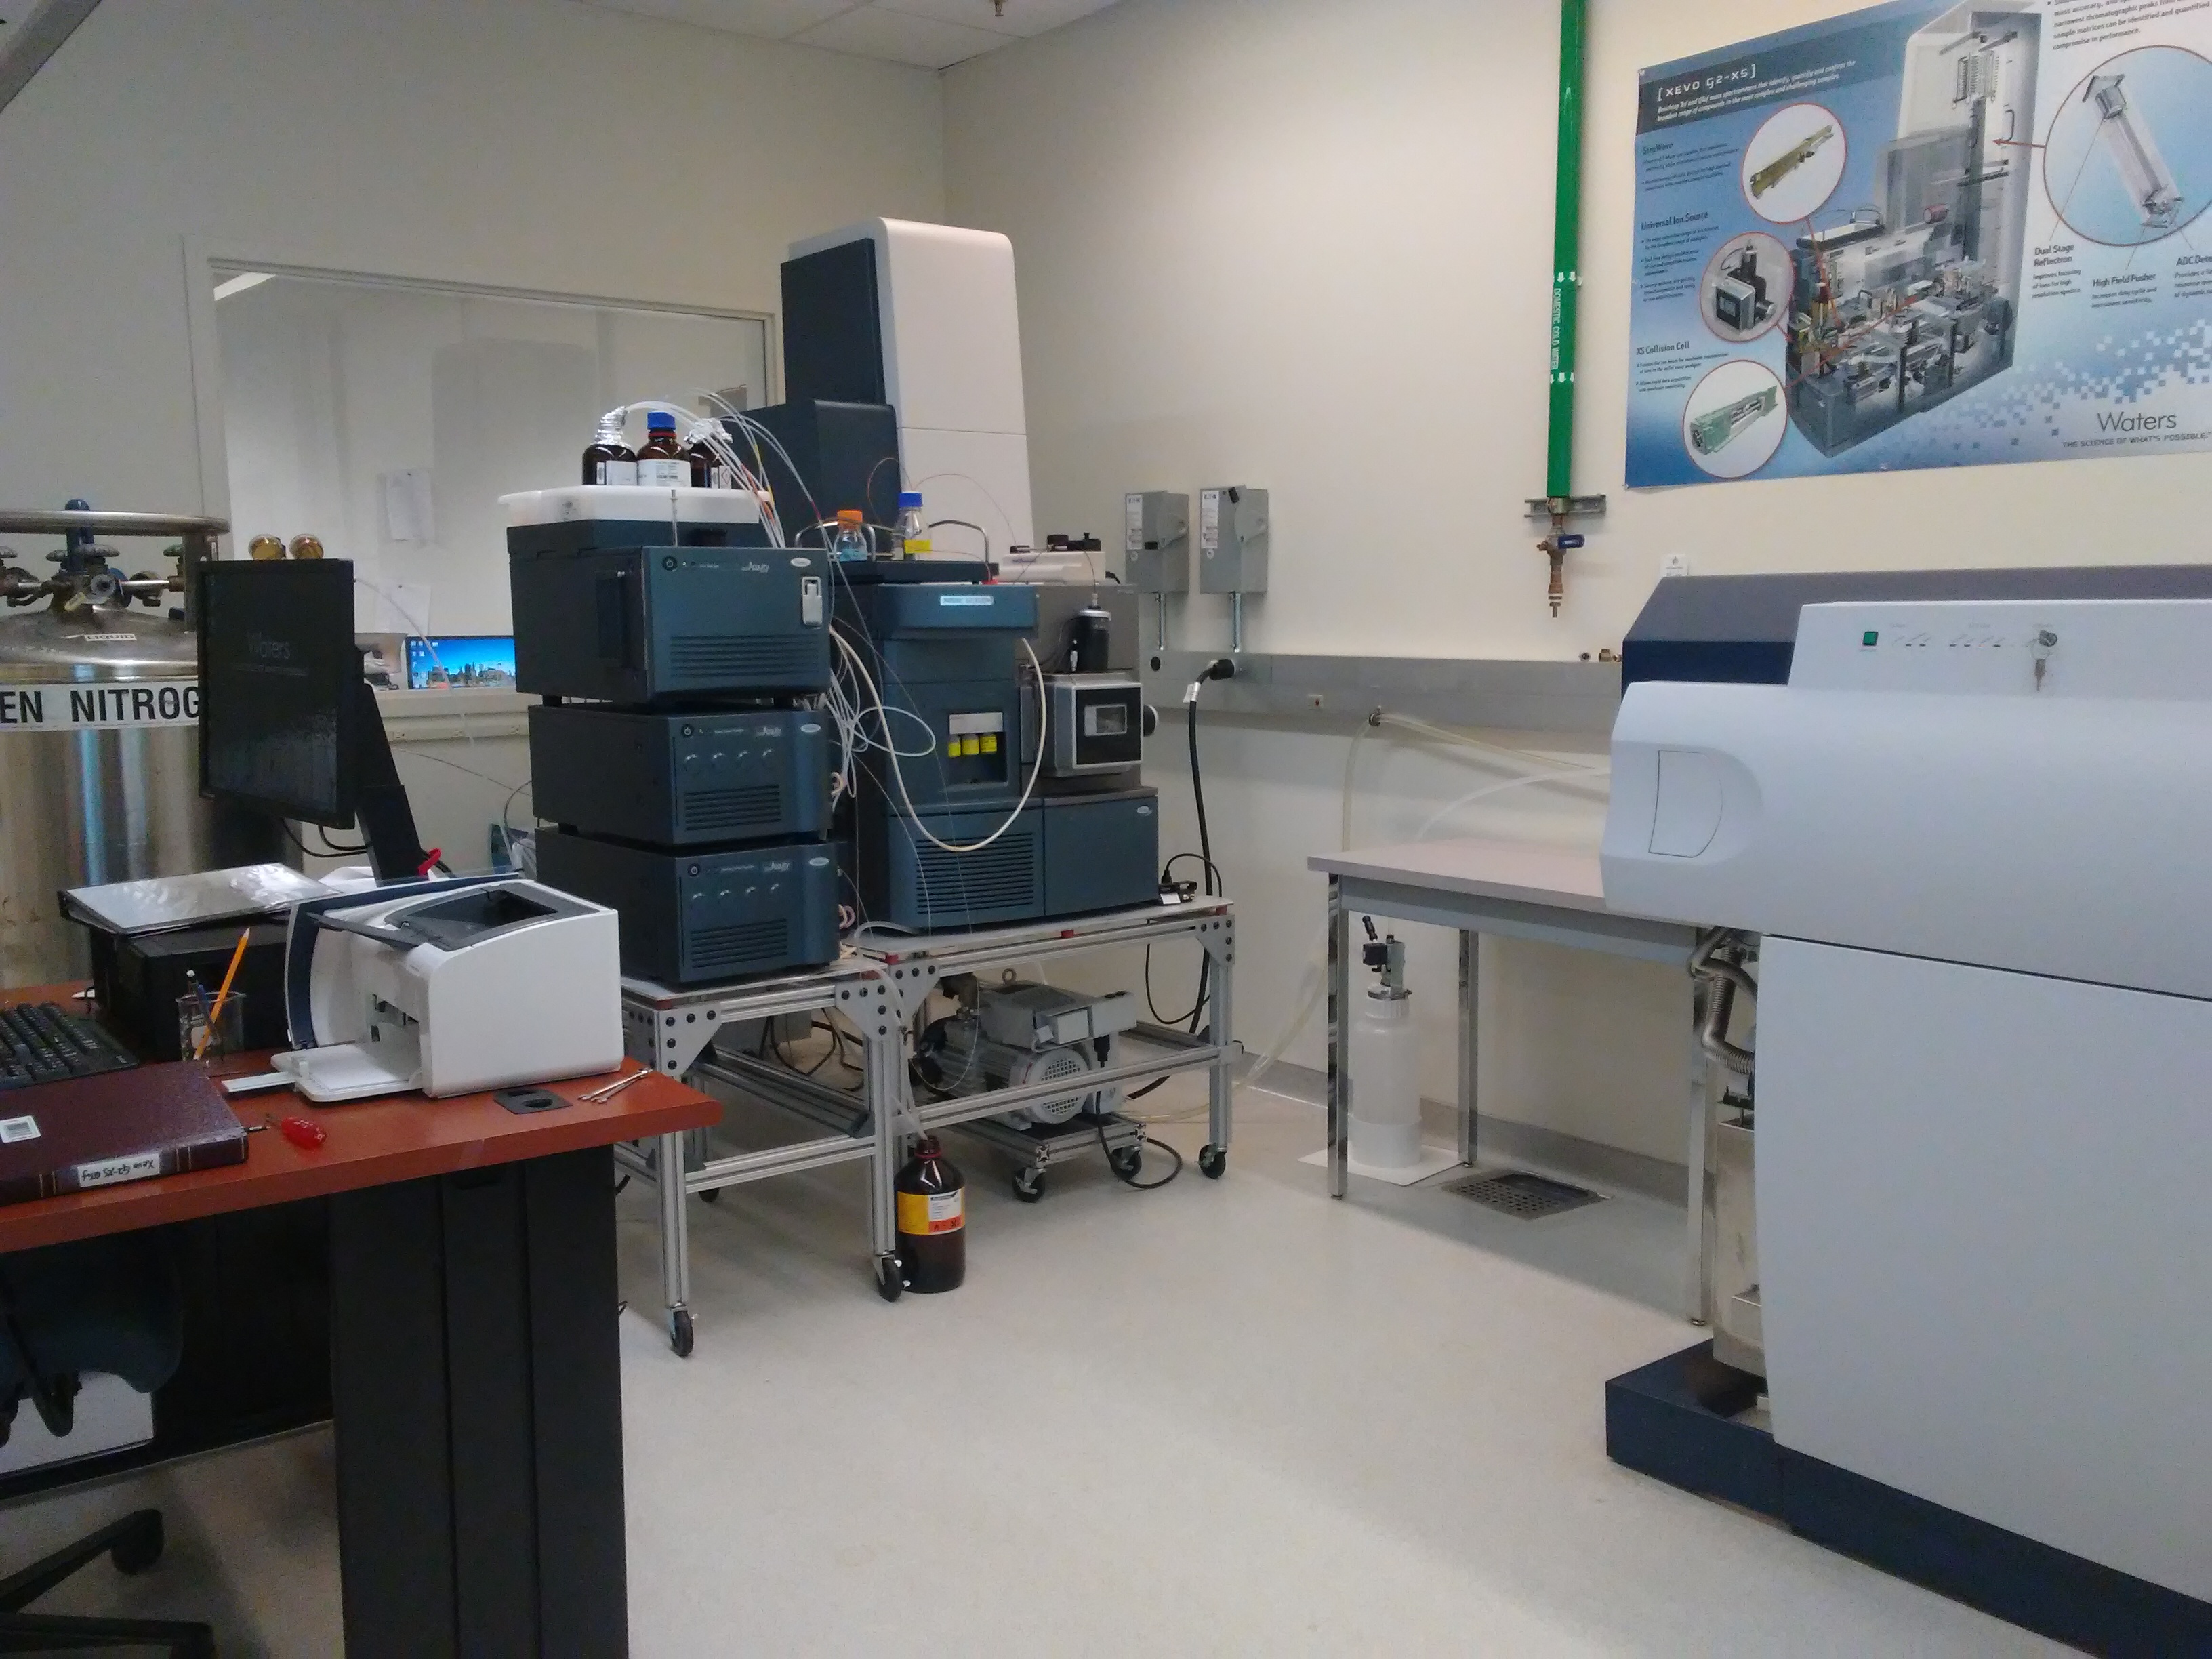 interior of the mass spectrometry facility, showing some of the equipment therein